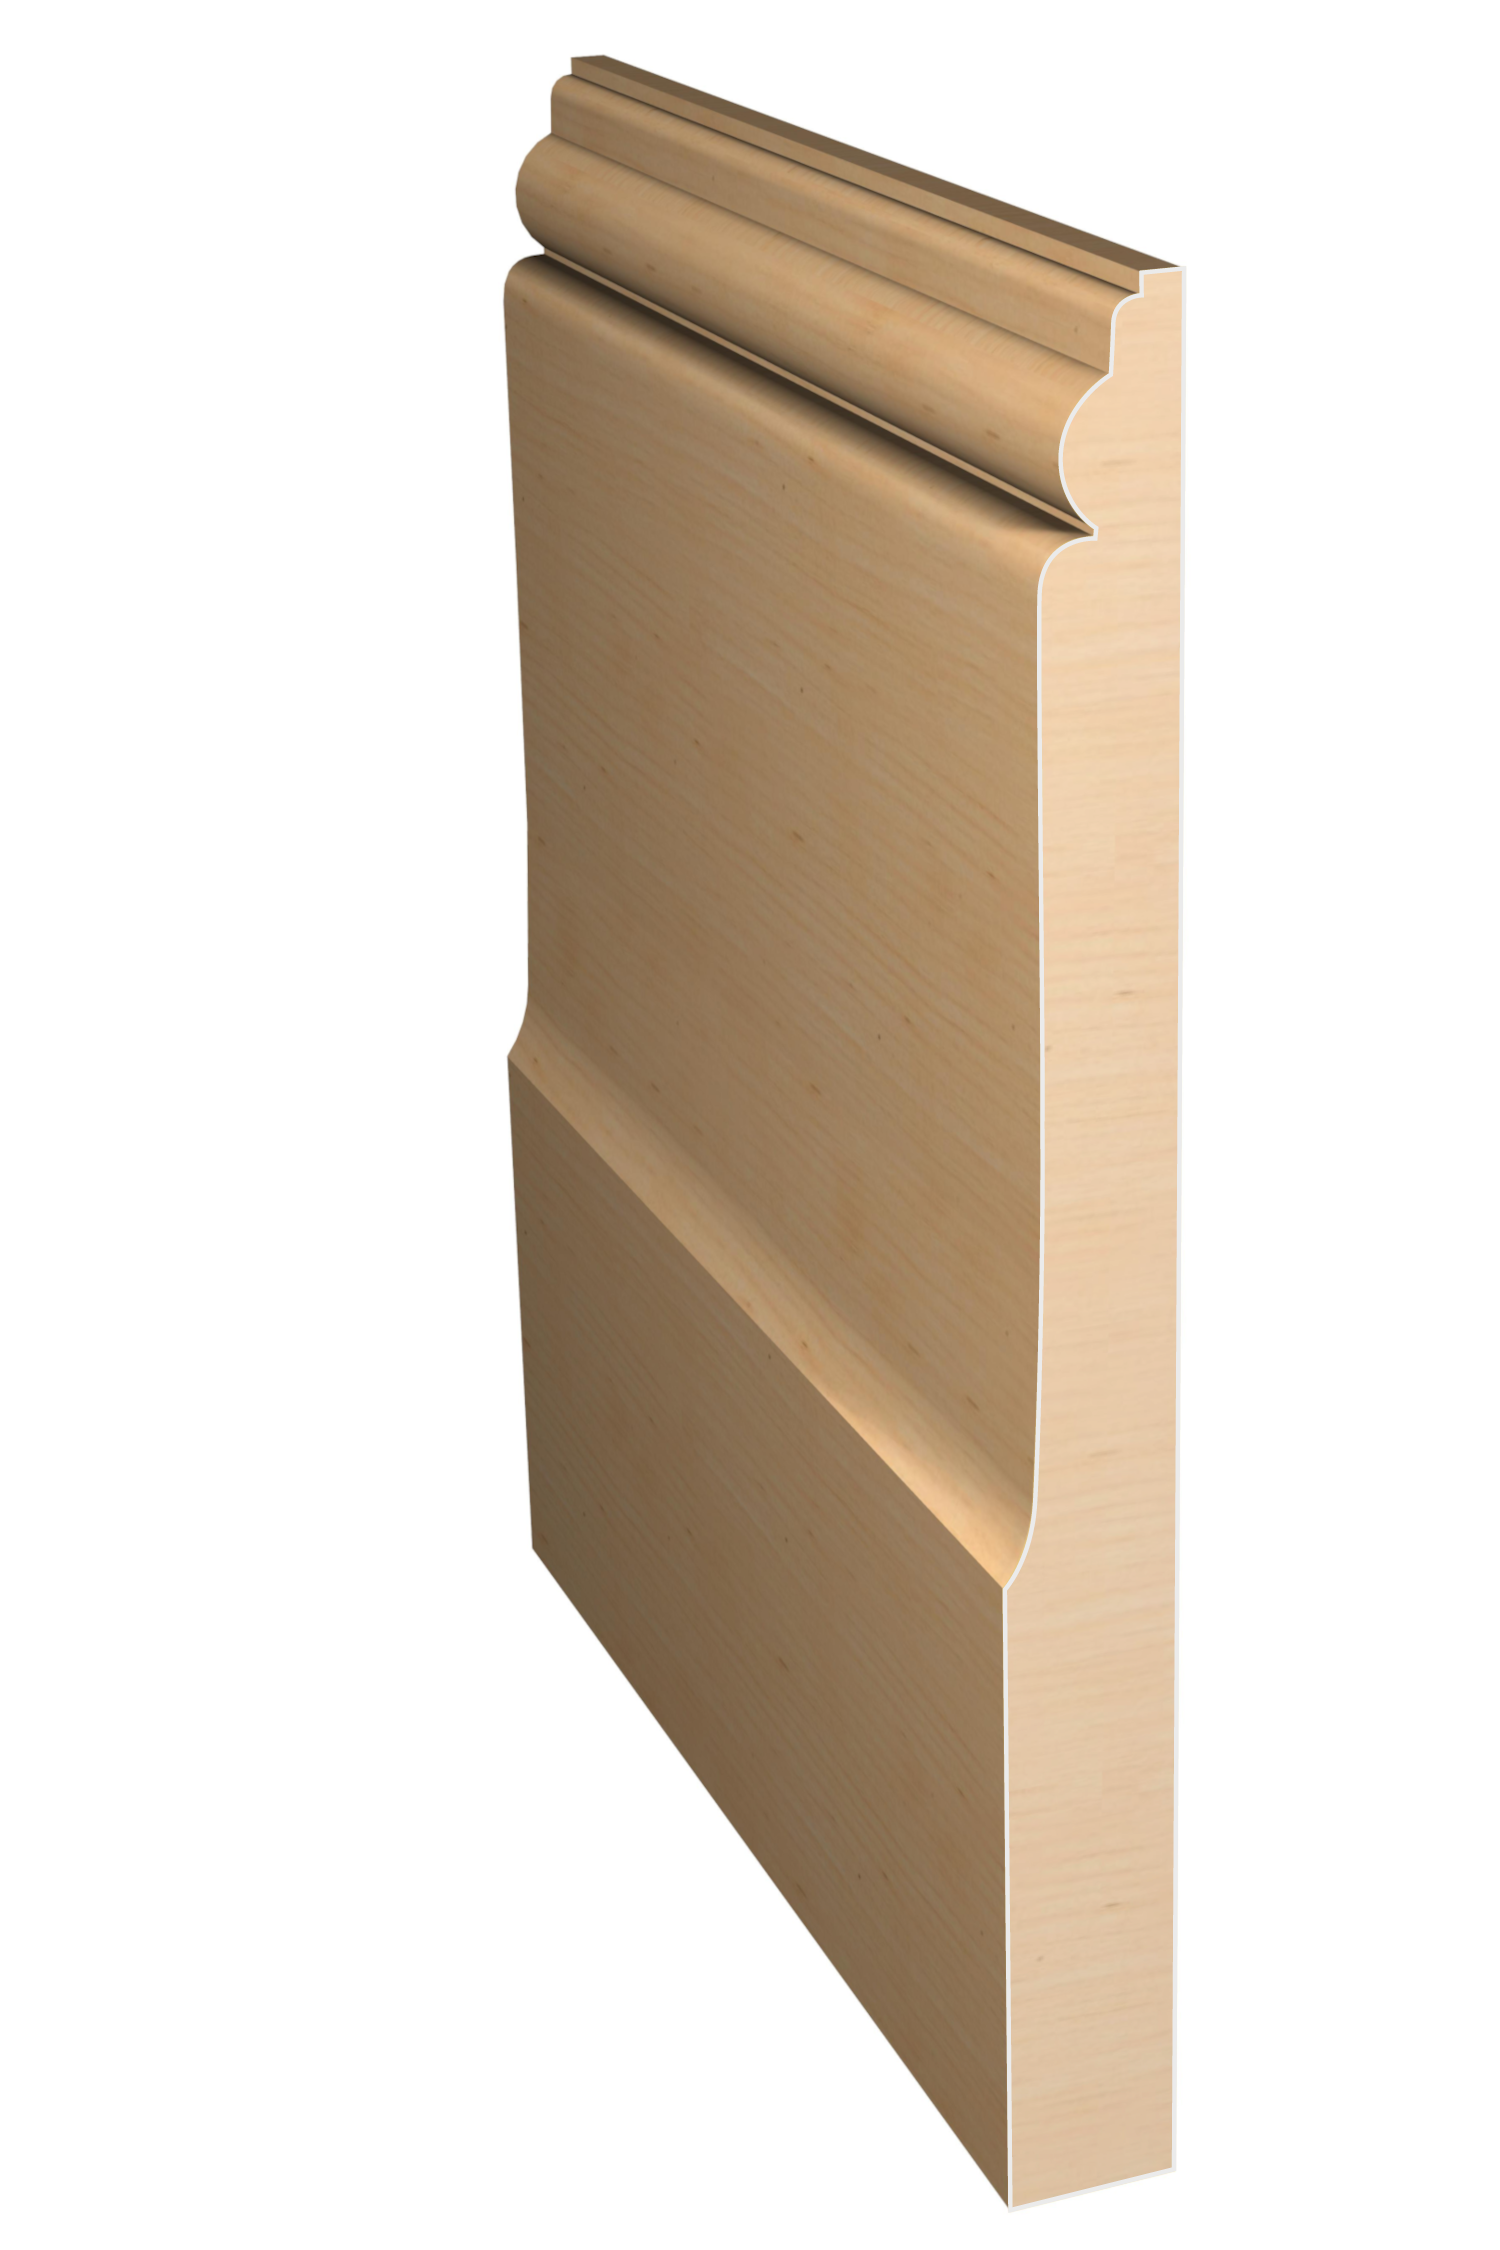 Three dimensional rendering of custom base wood molding BAPL83 made by Public Lumber Company in Detroit.